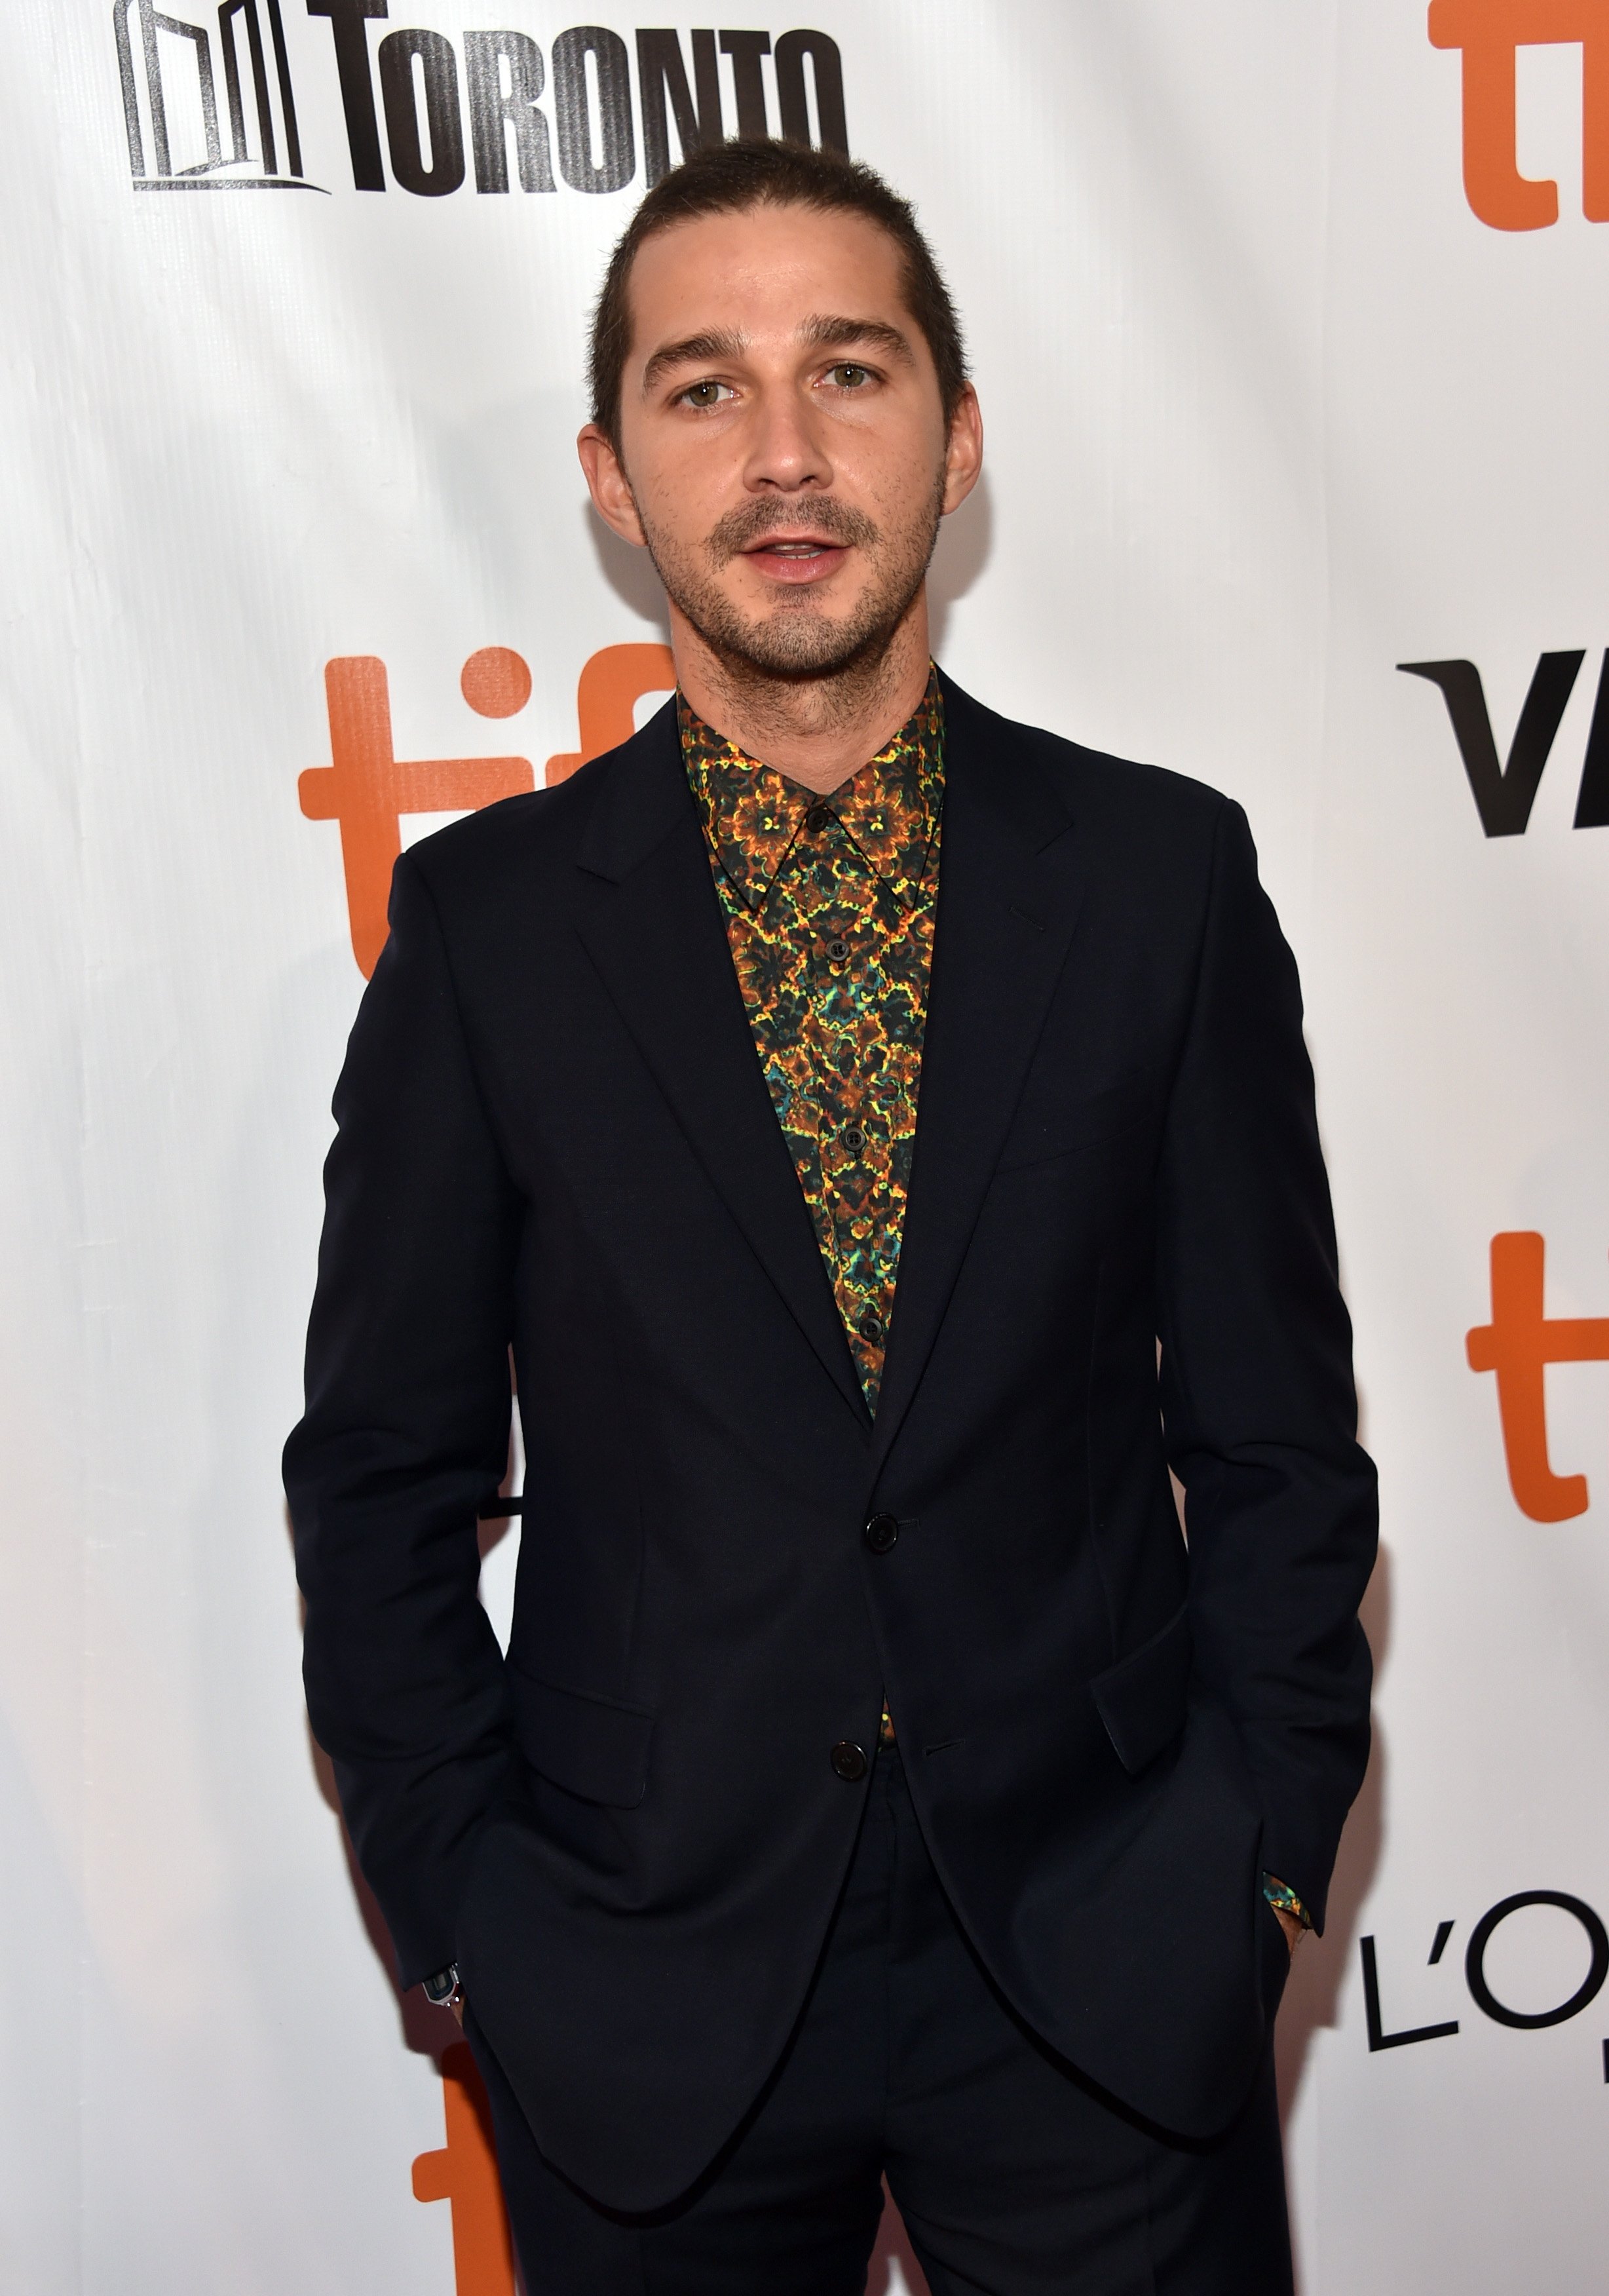 Shia LaBeouf at the “Borg/McEnroe” premiere on September 7, 2017 in Toronto. | Source: Getty Images